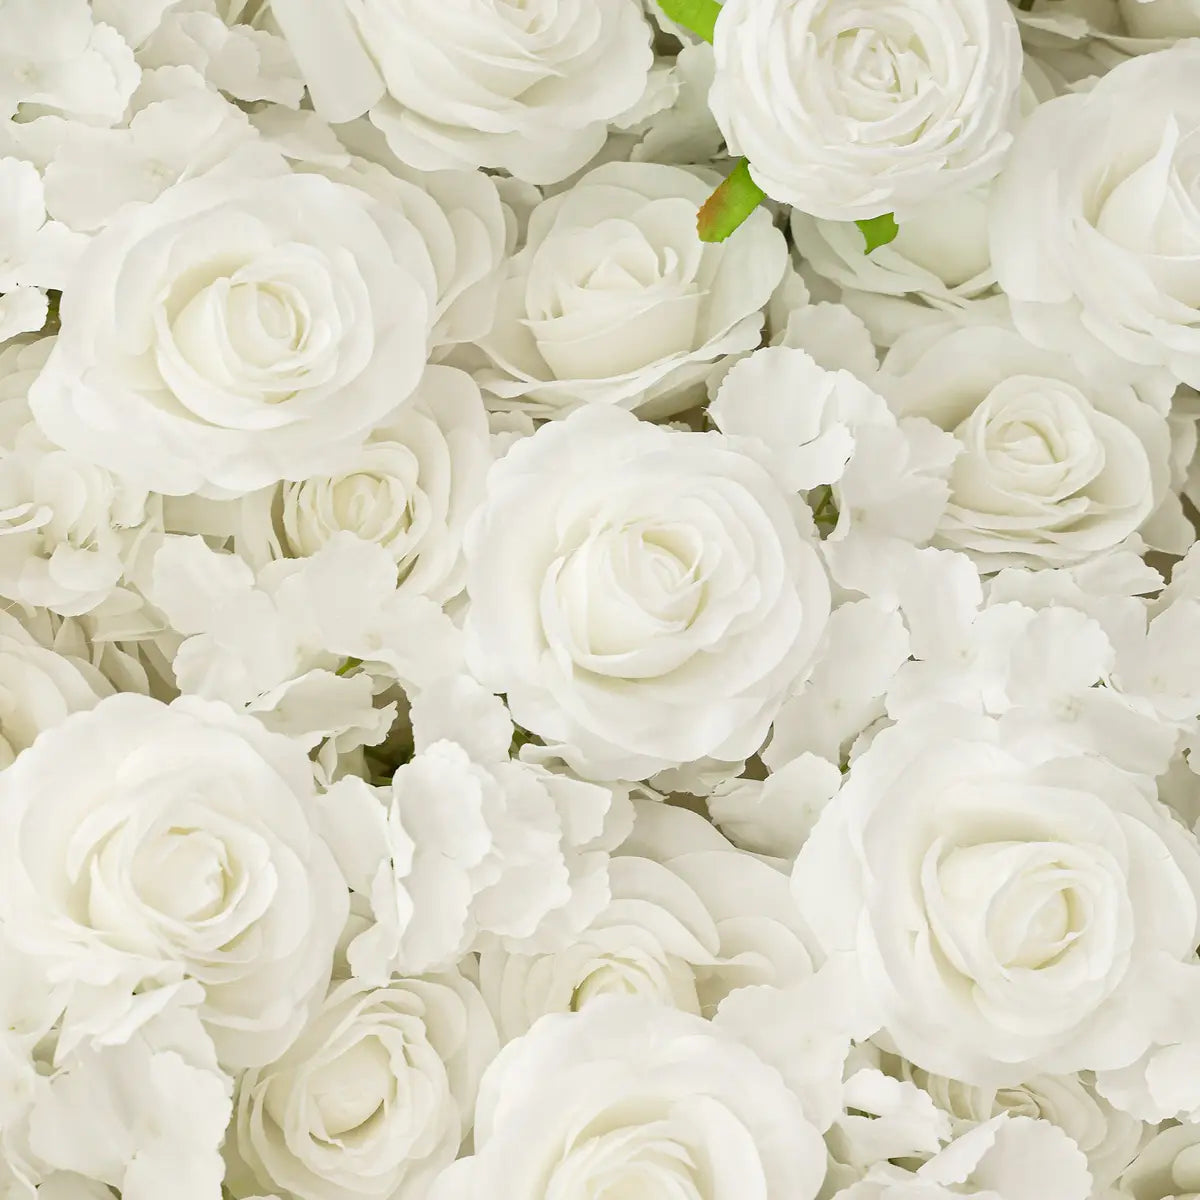 The 3D white rose flower wall detailed view highlights its vibrant, realistic shapes and fabric backing.